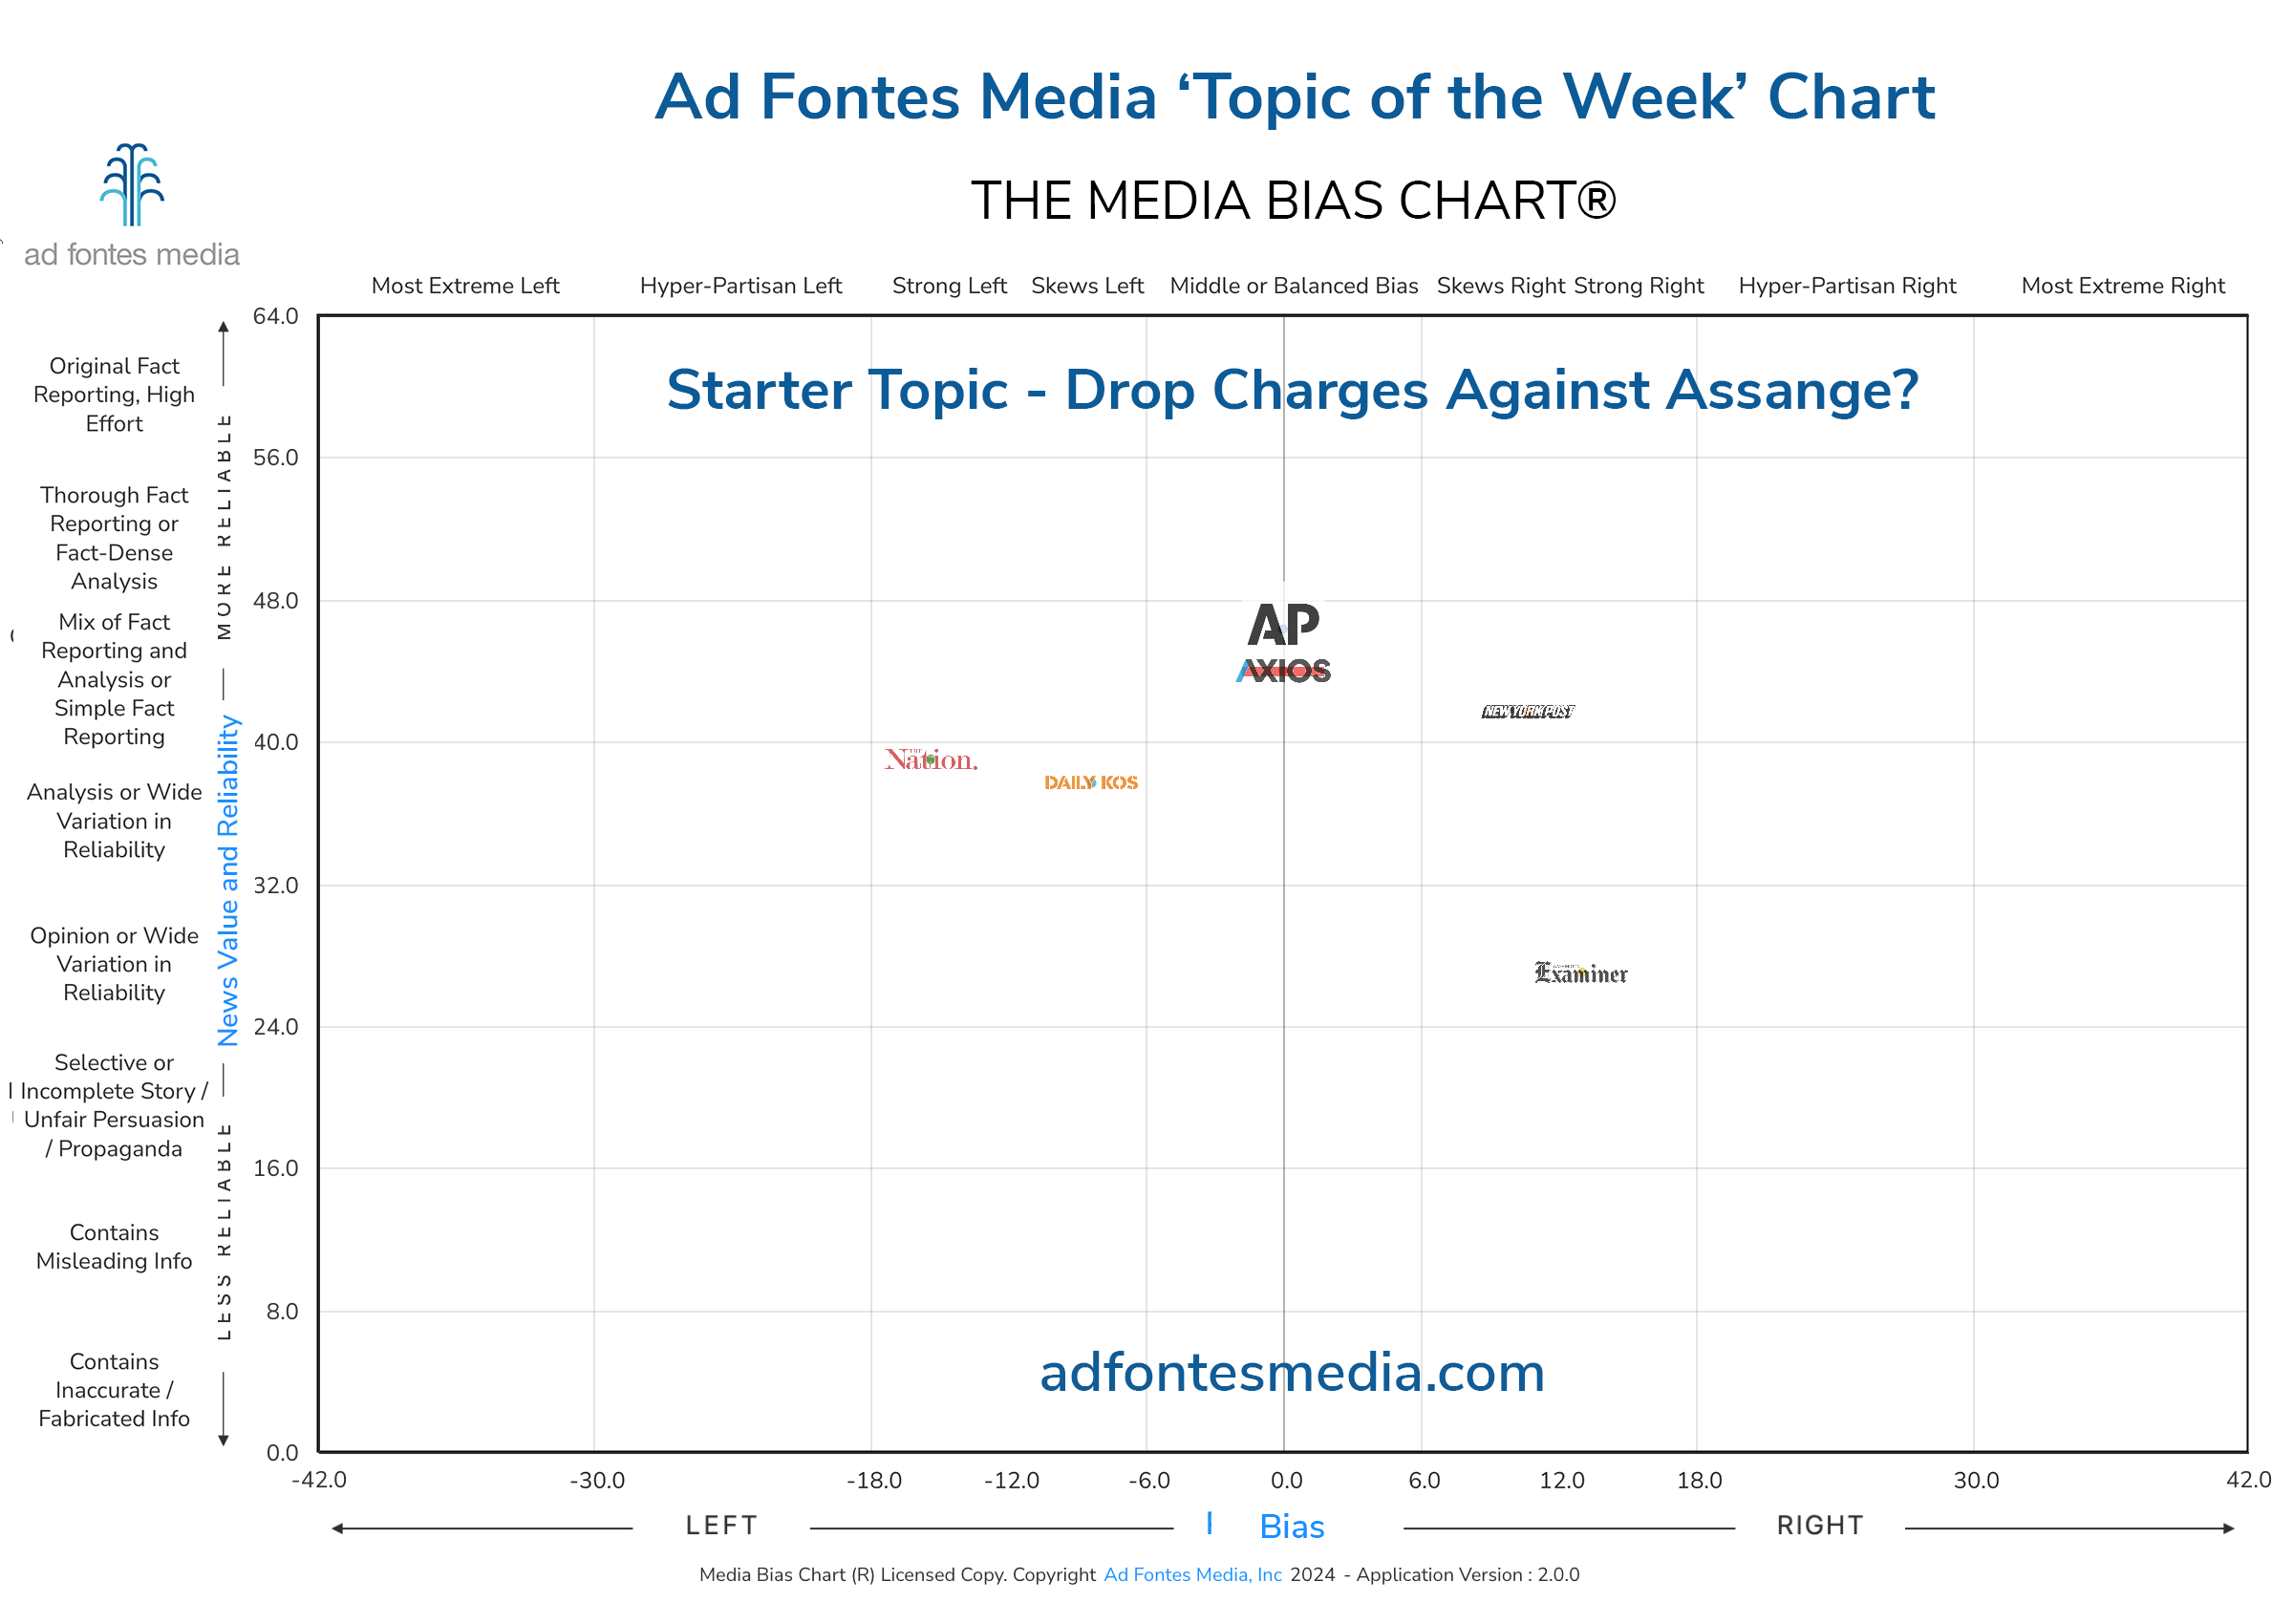 The Media Bias Chart takes a look at articles covering President Biden considering dropping espionage charges against WikiLeaks founder Julian Assange